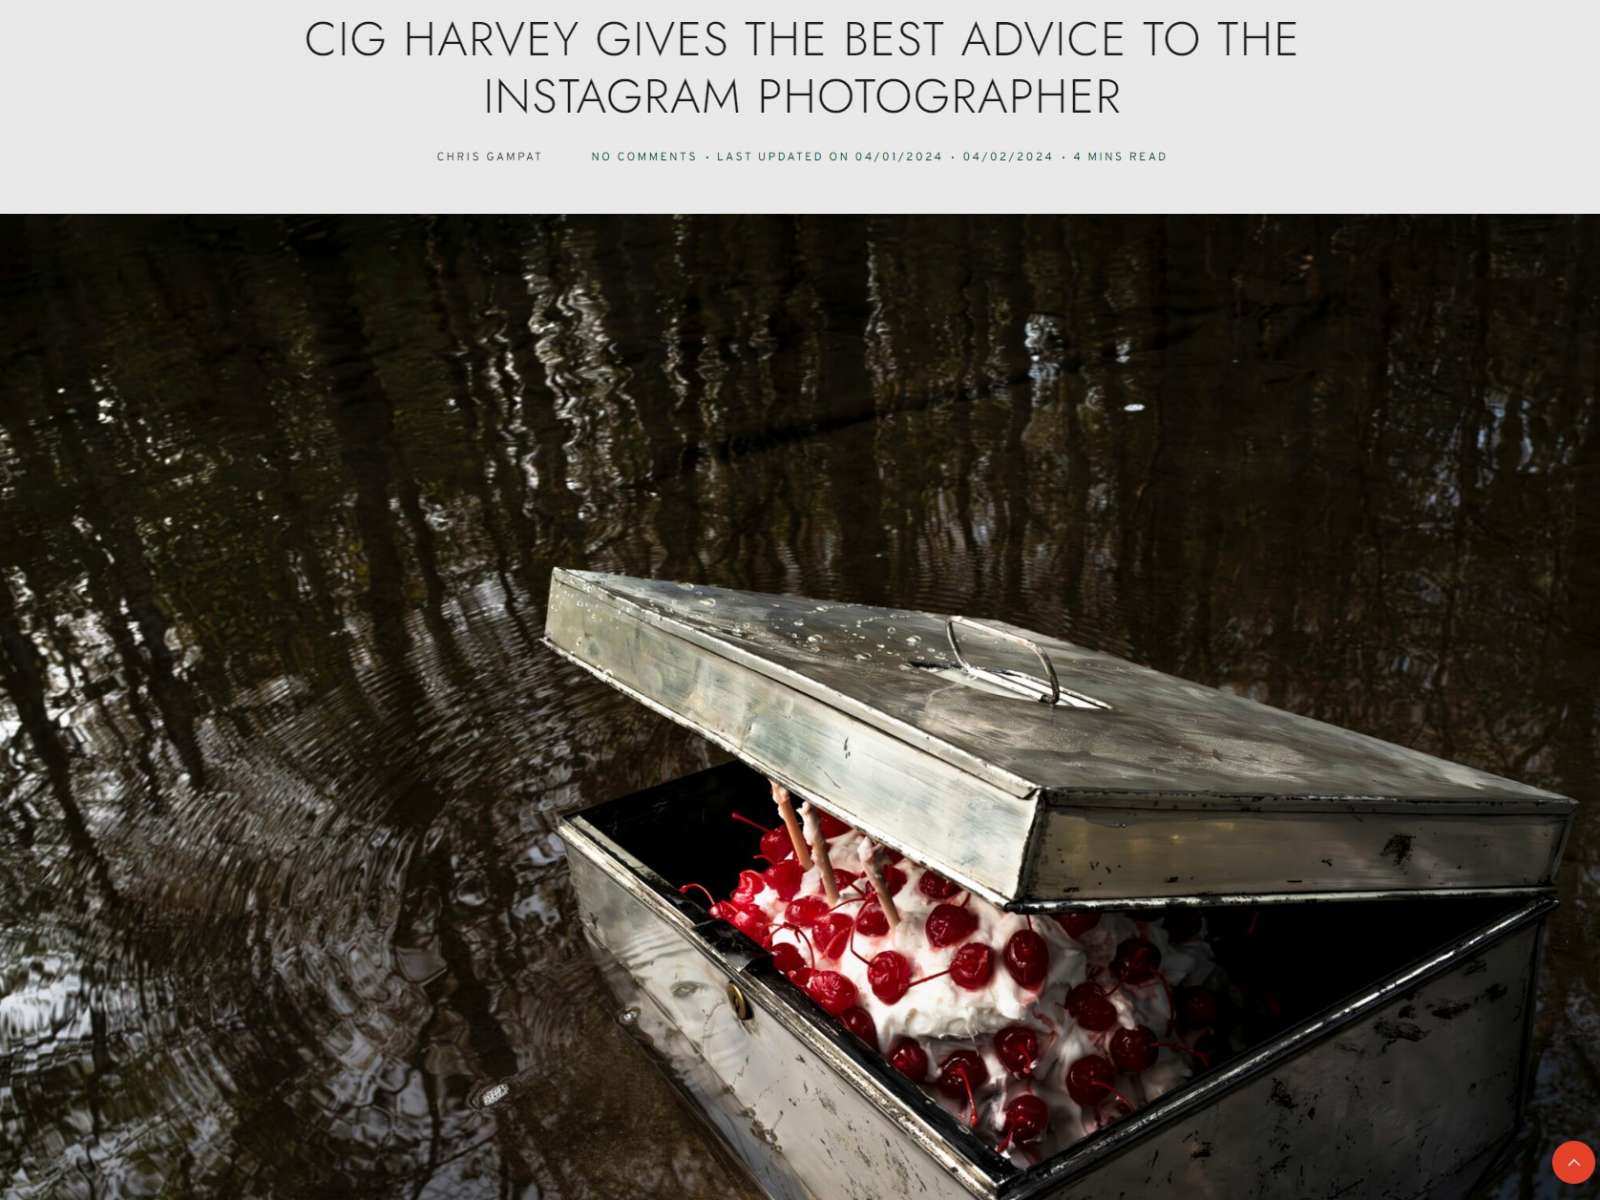 CIG HARVEY GIVES THE BEST ADVICE TO THE INSTAGRAM PHOTOGRAPHER